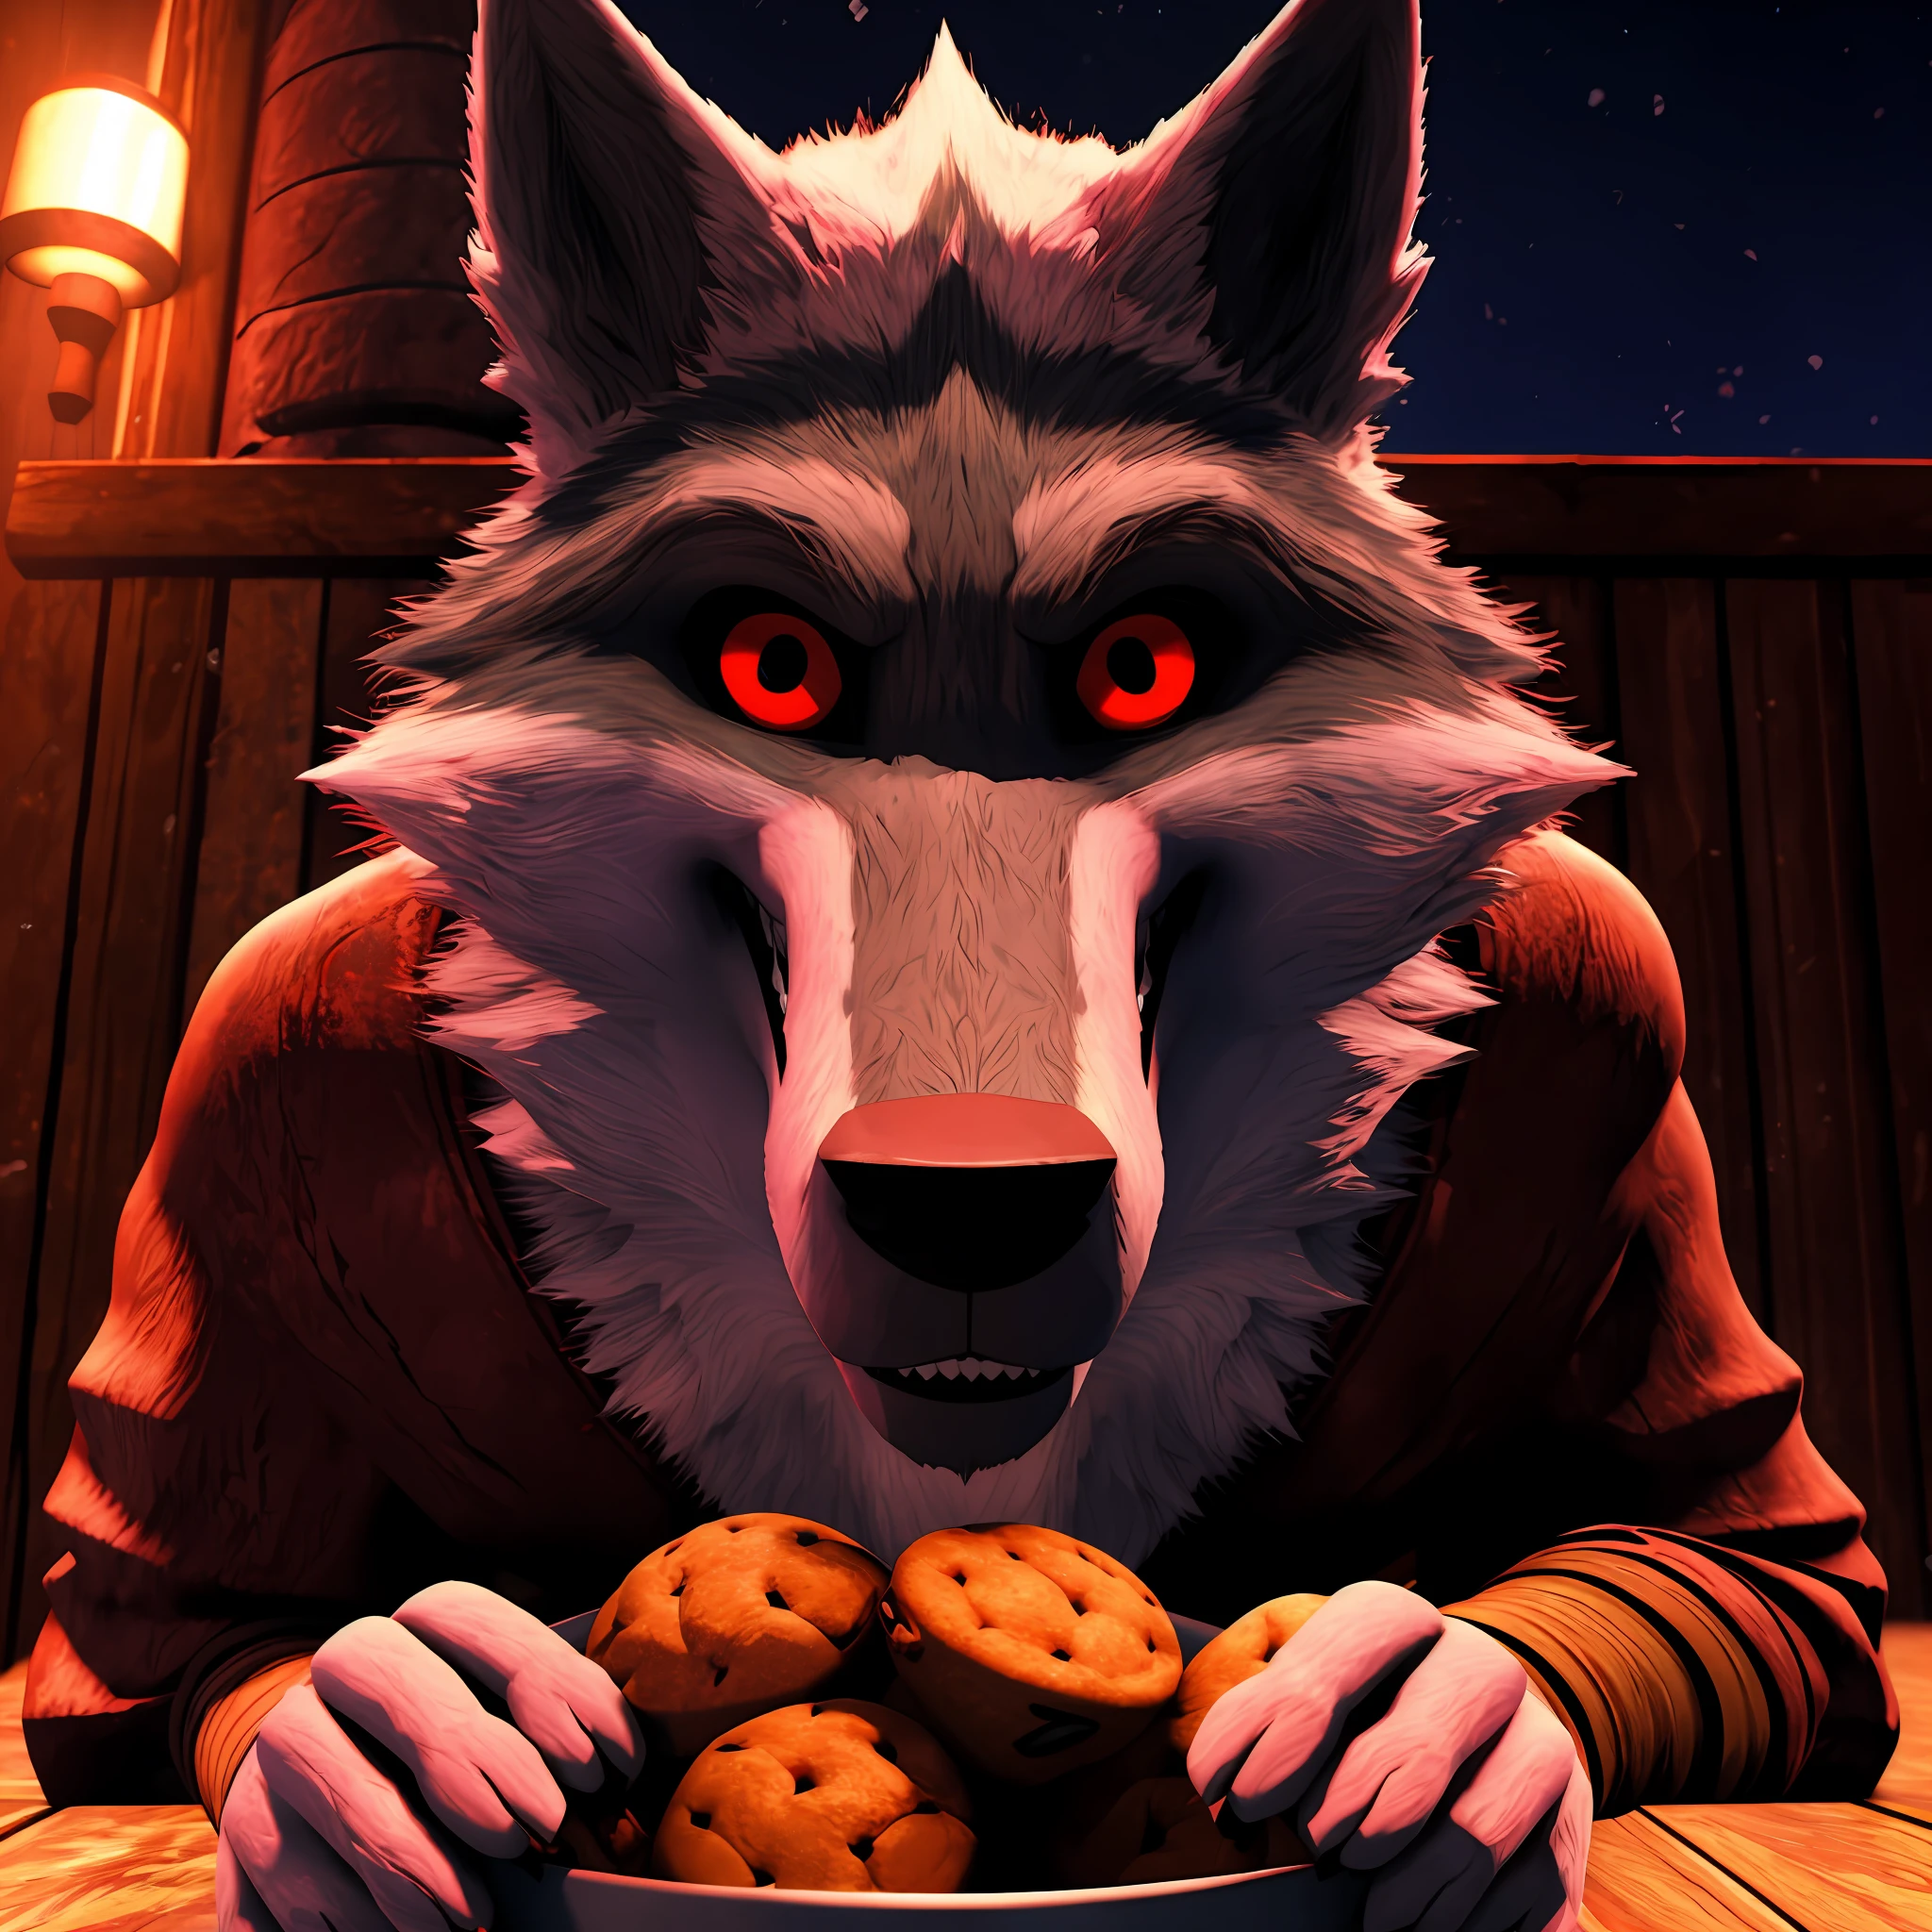 (death Wolf 3D 4K) is looking at the viewer and making a good snack of the night red eyes